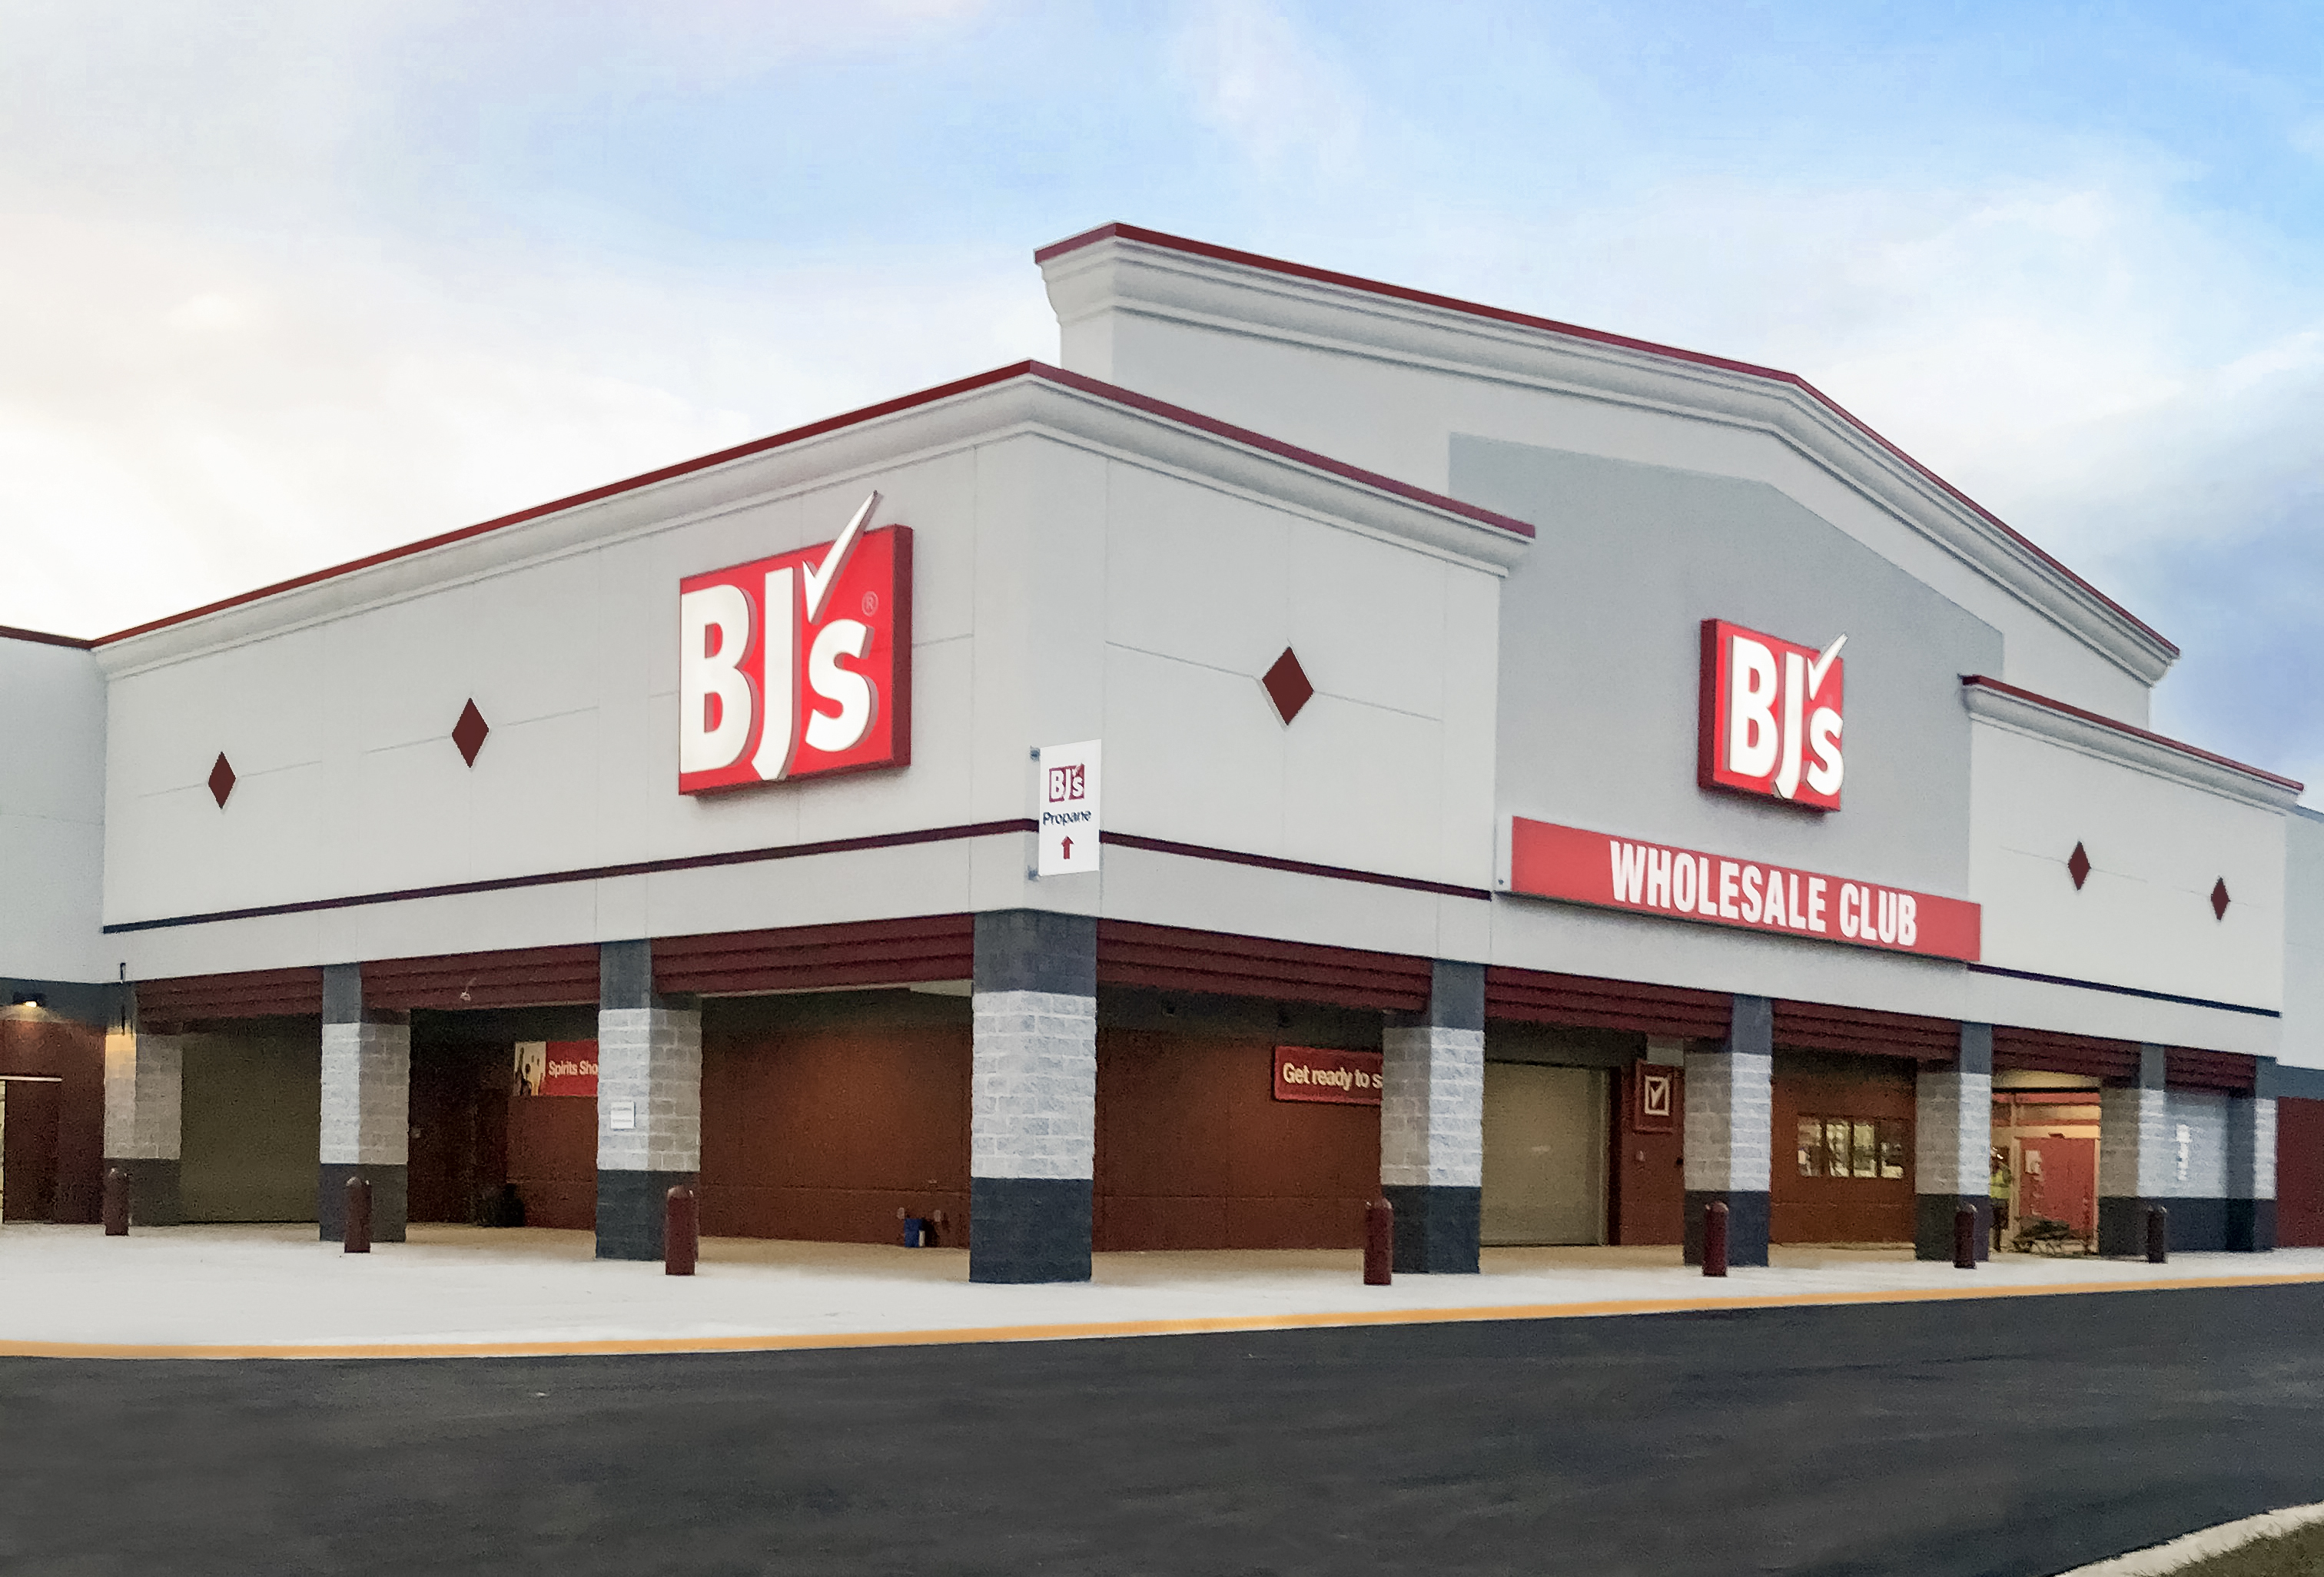 Bj S Wholesale Club Expands Its Footprint With Plans To Open Six New Clubs Business Wire